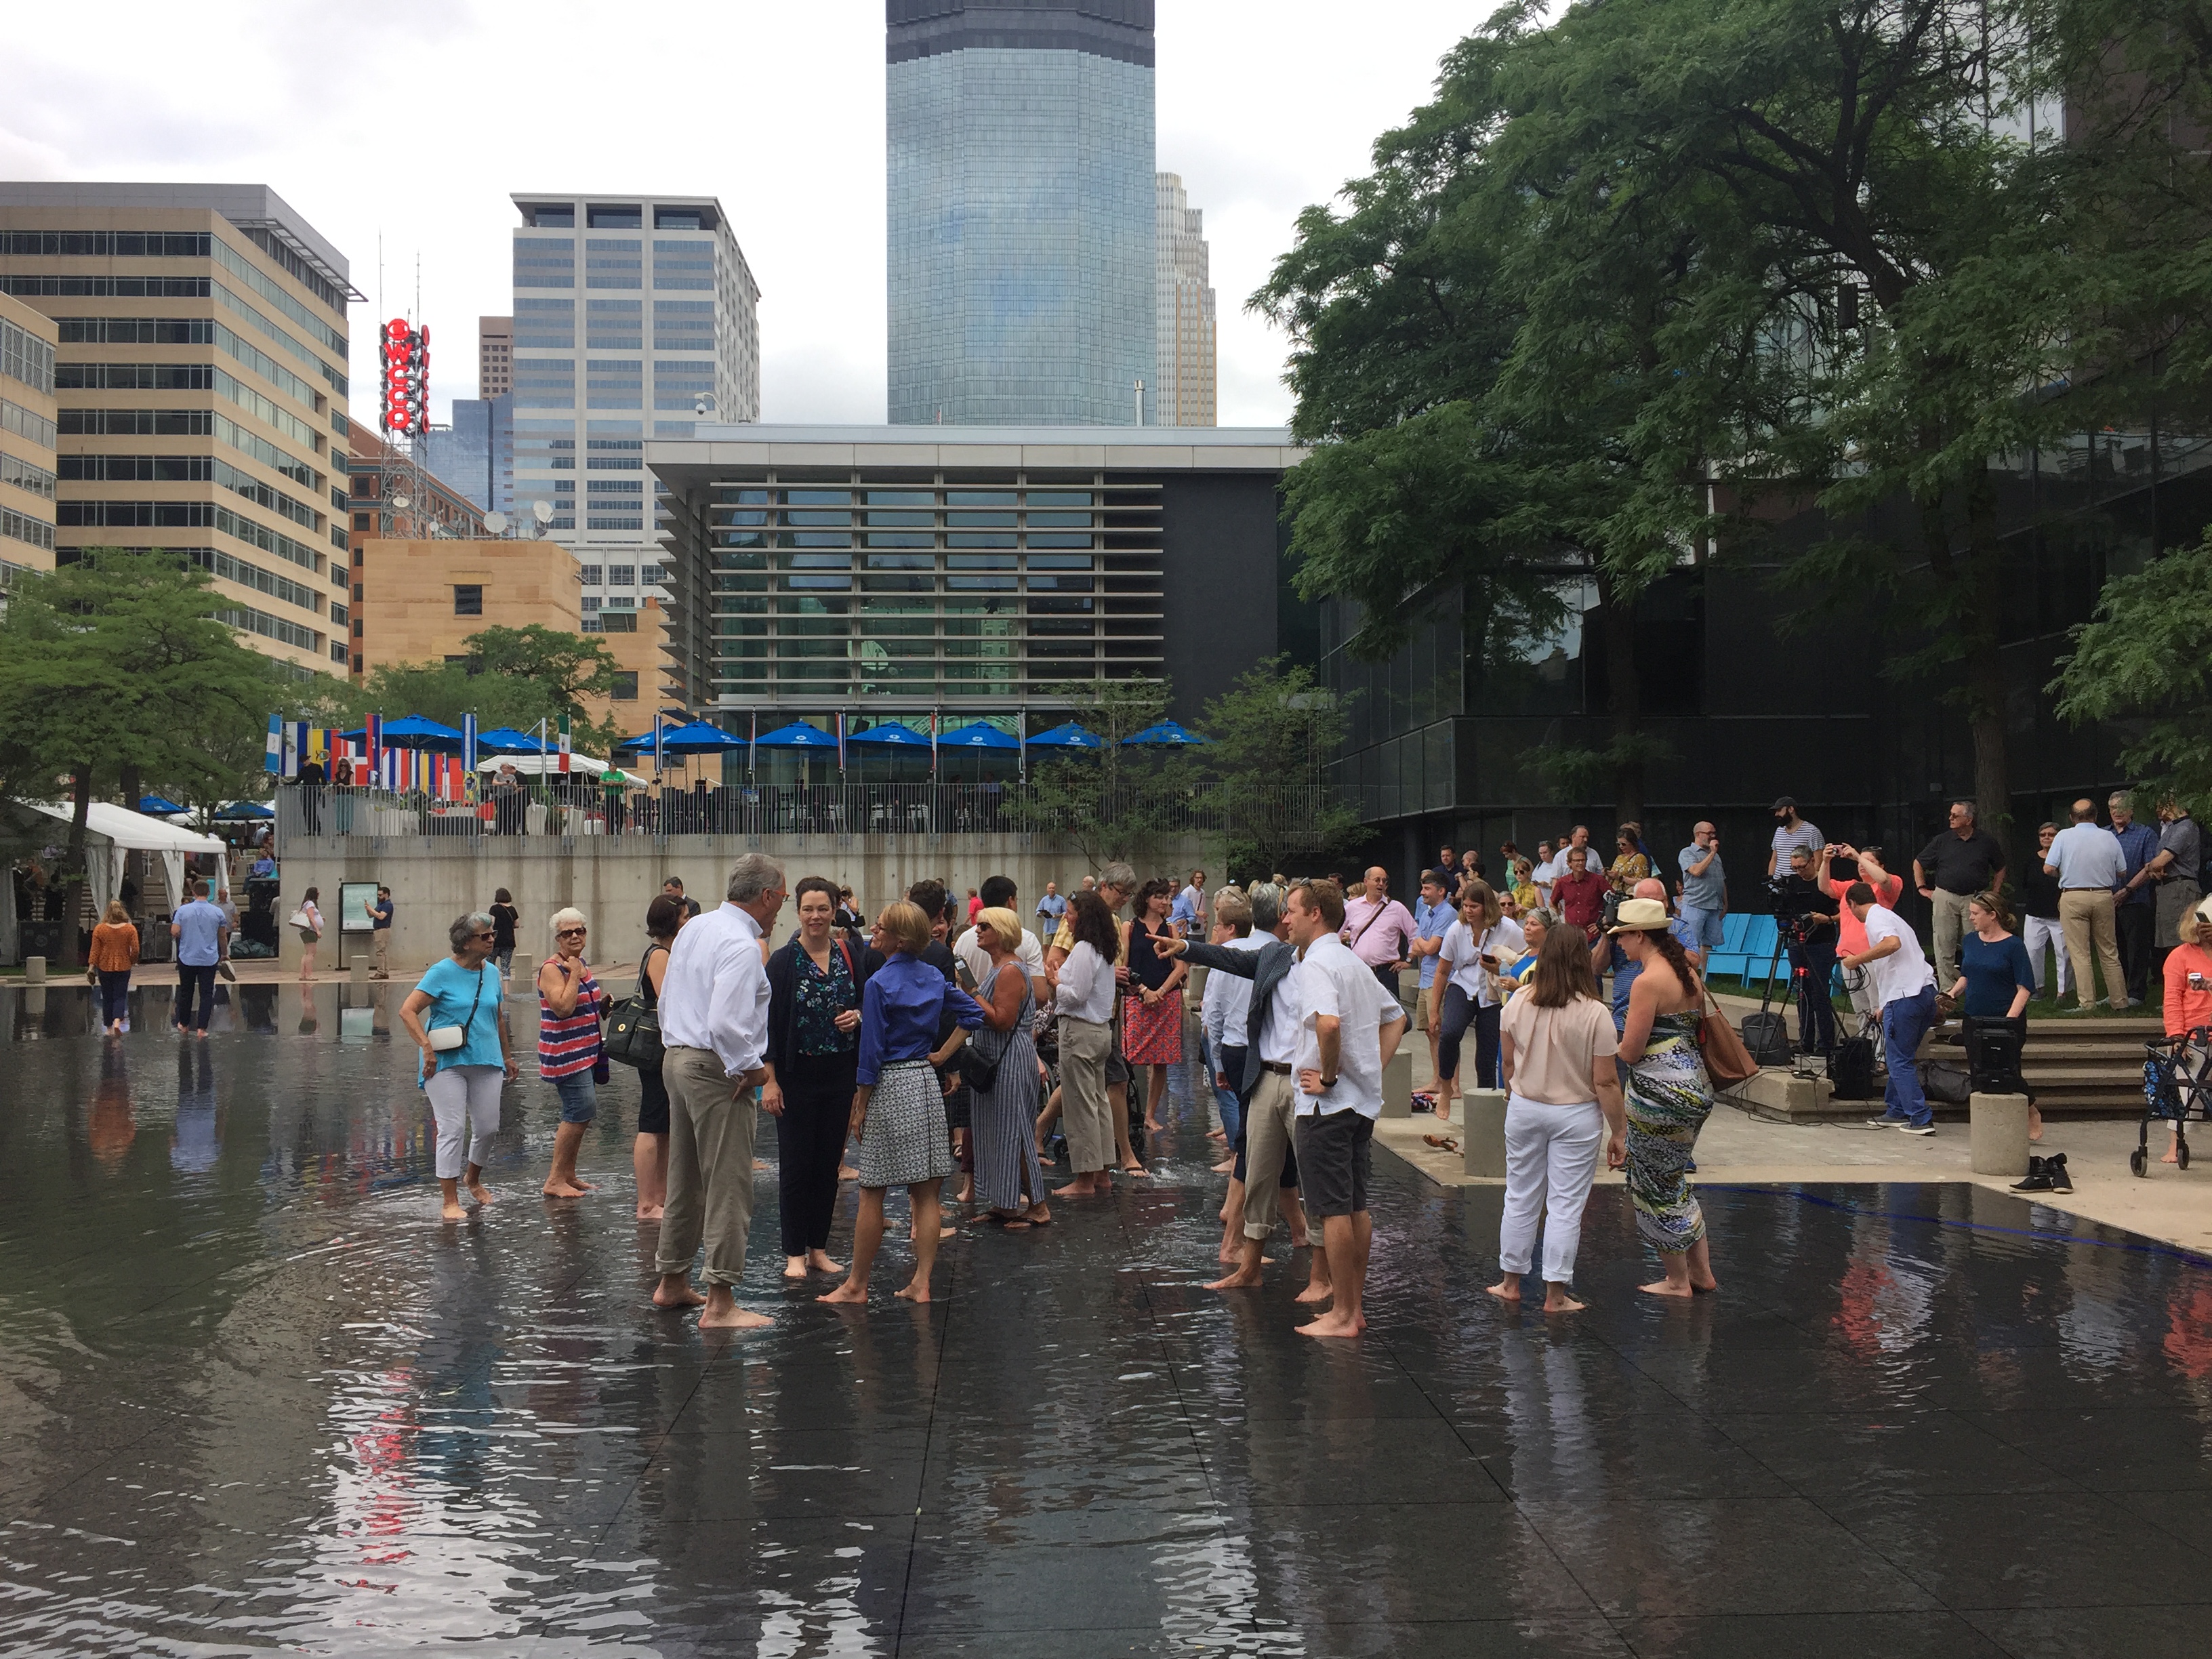 People wading in a shallow pond at the Peavey Plaza grand opening celebration.